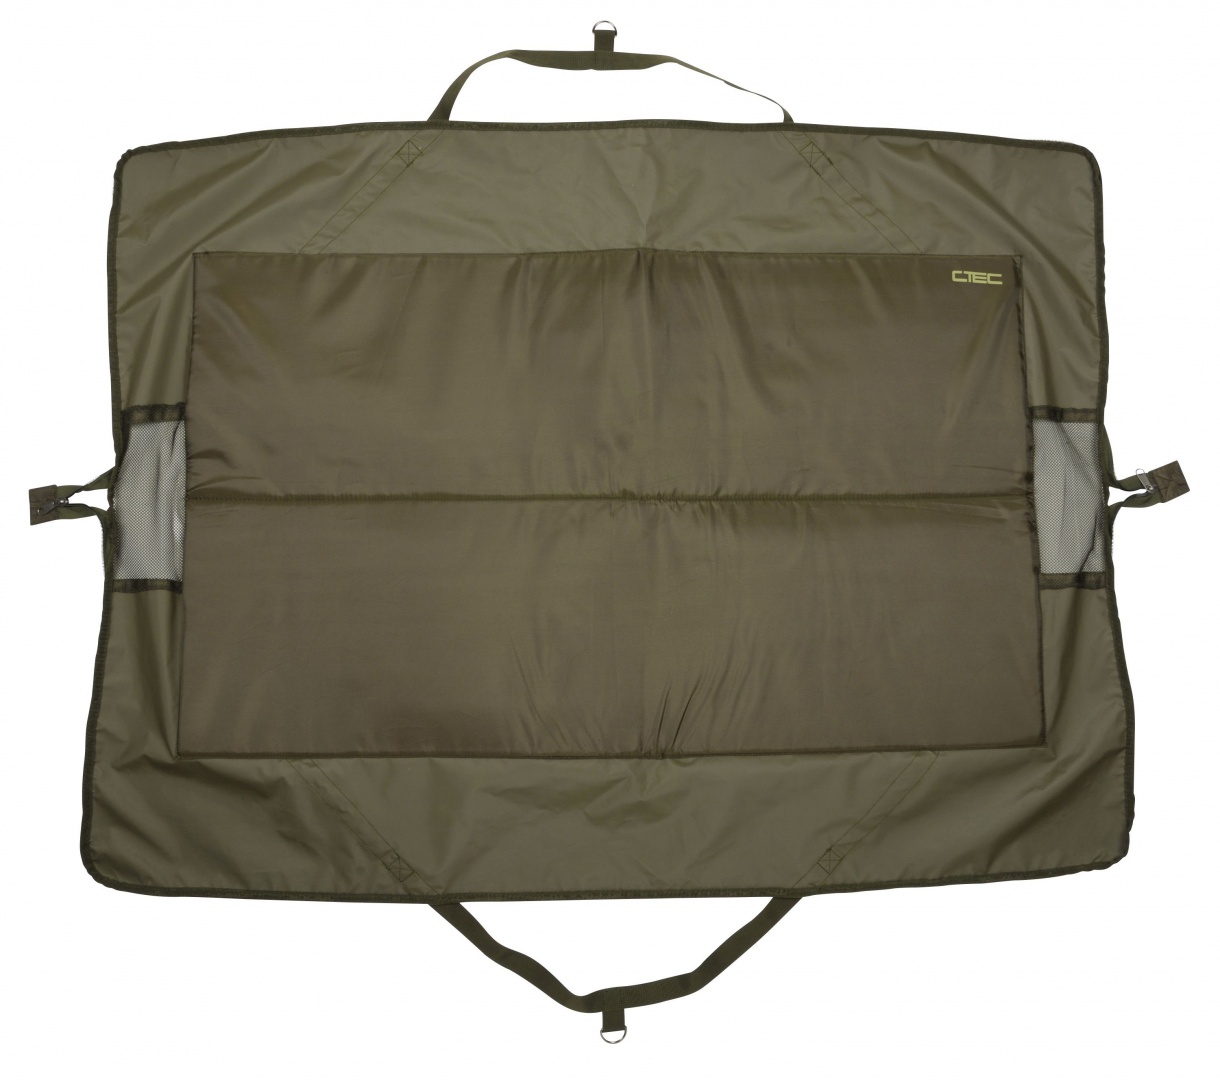 Spro C-TEC Weigh Sling and Unhooking Mat